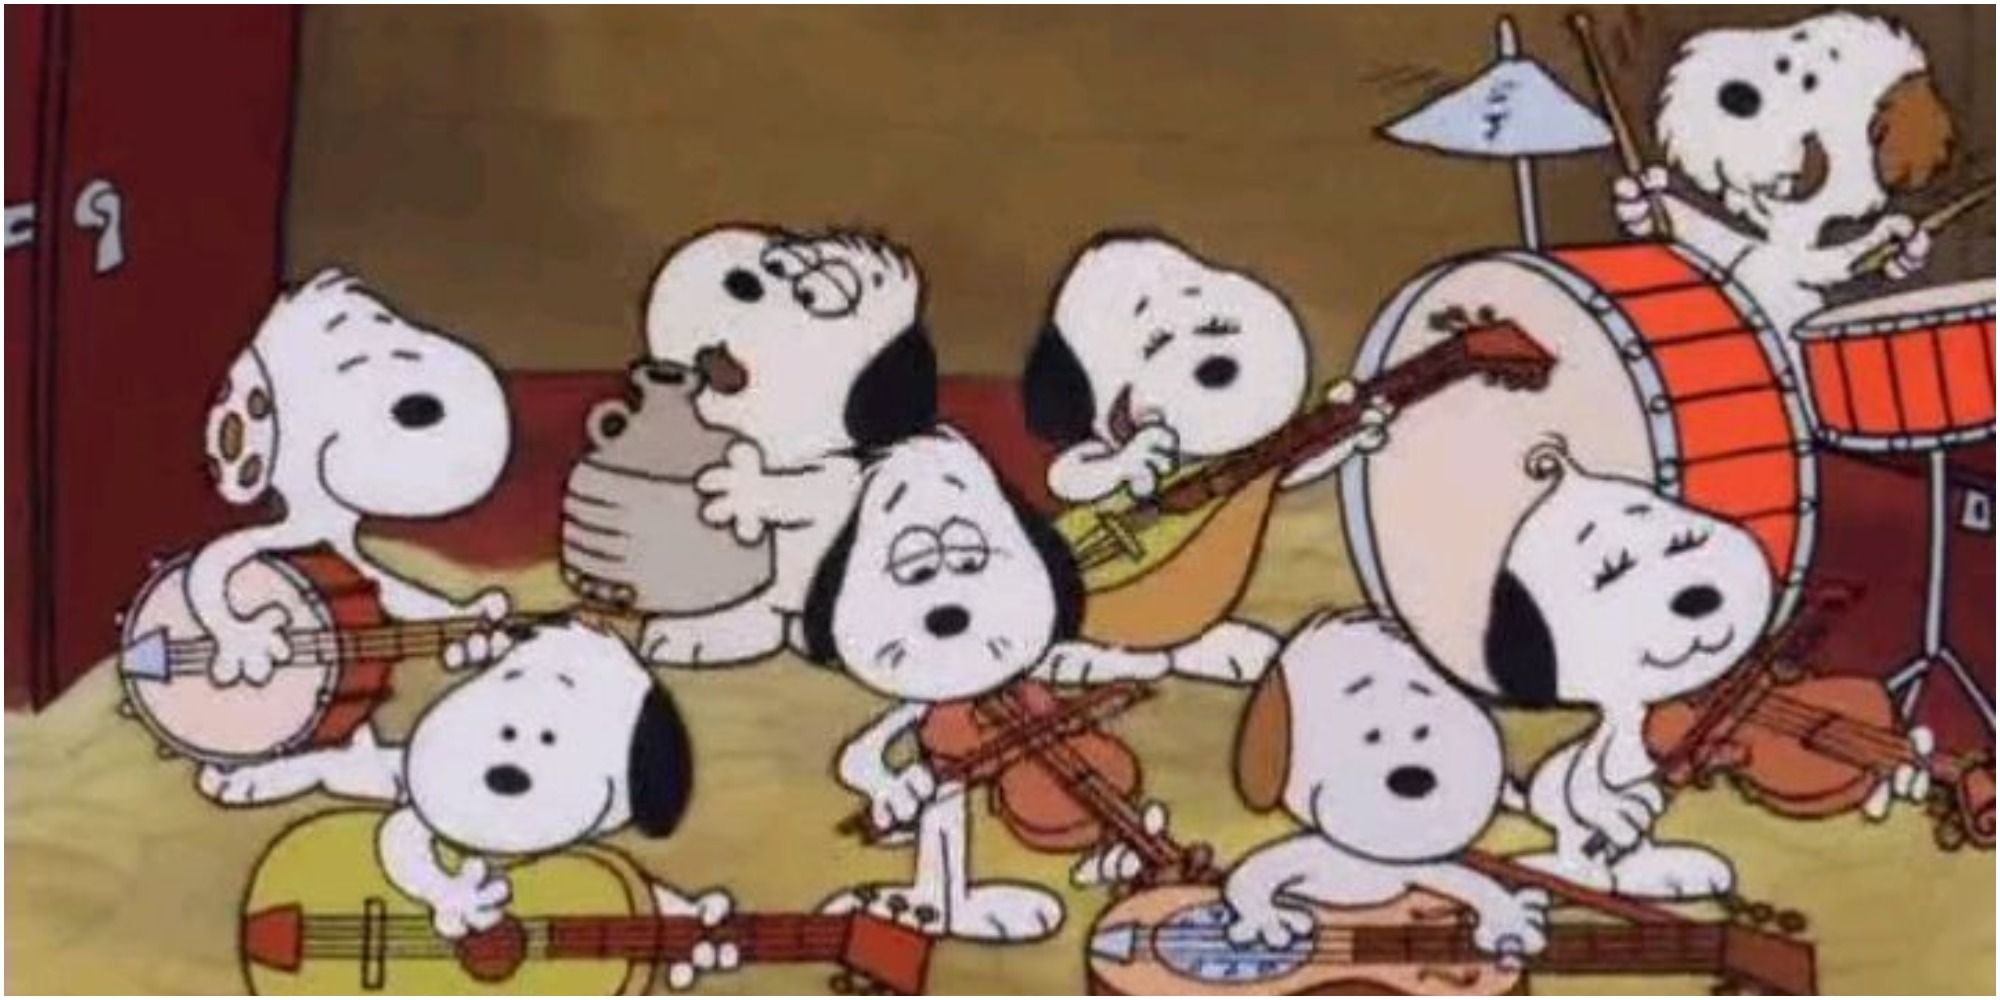 Snoopy 10 Most Memorable Appearances Ranked